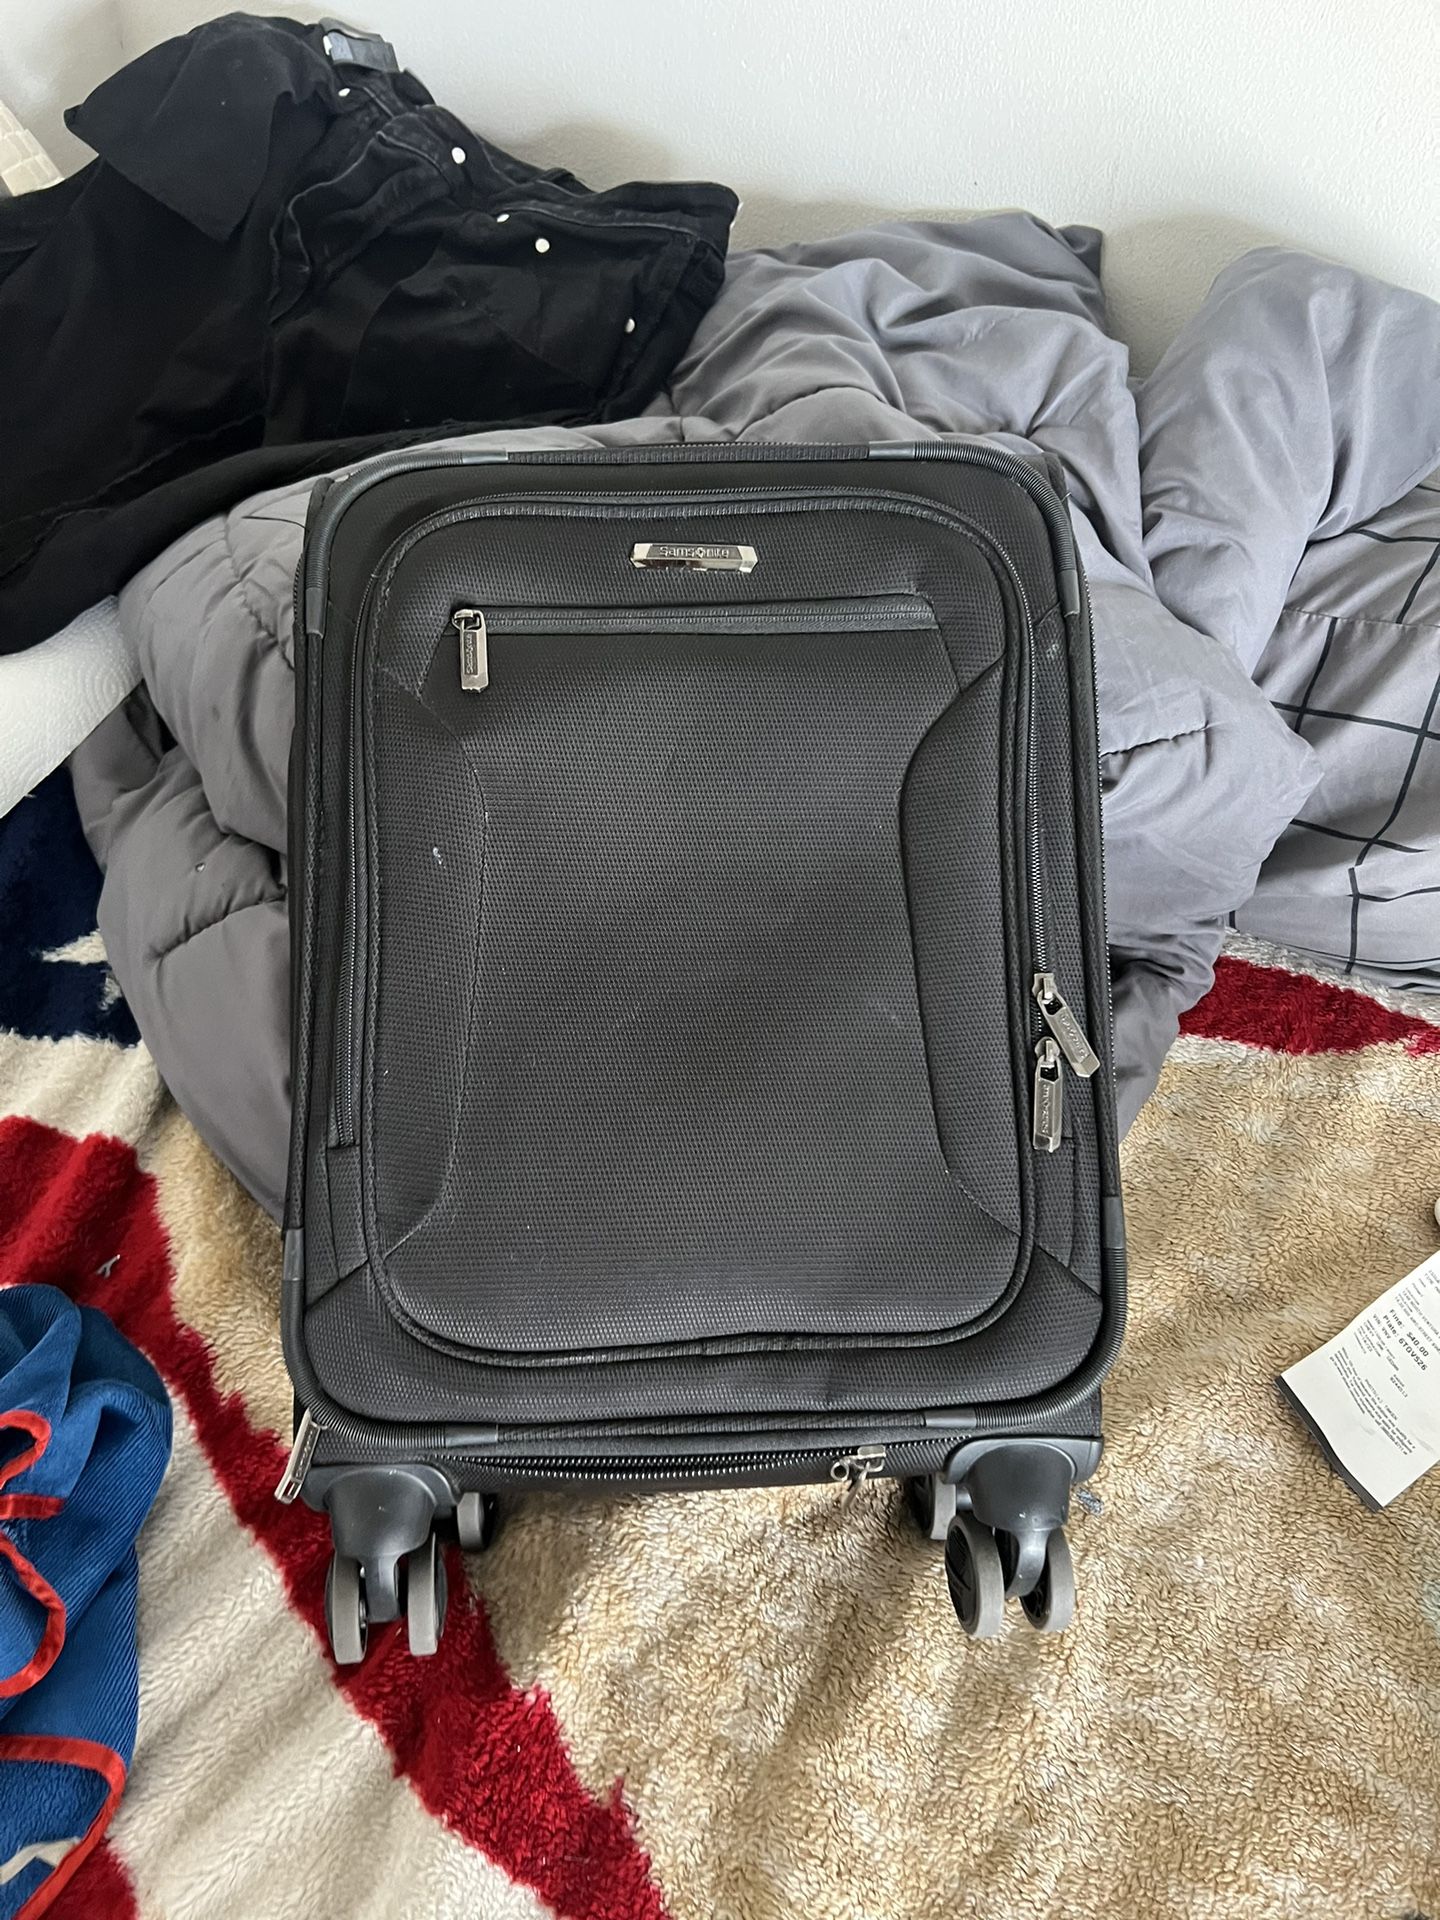 Samsonite DLX Carry-On - Pre-owned in Excellent Condition